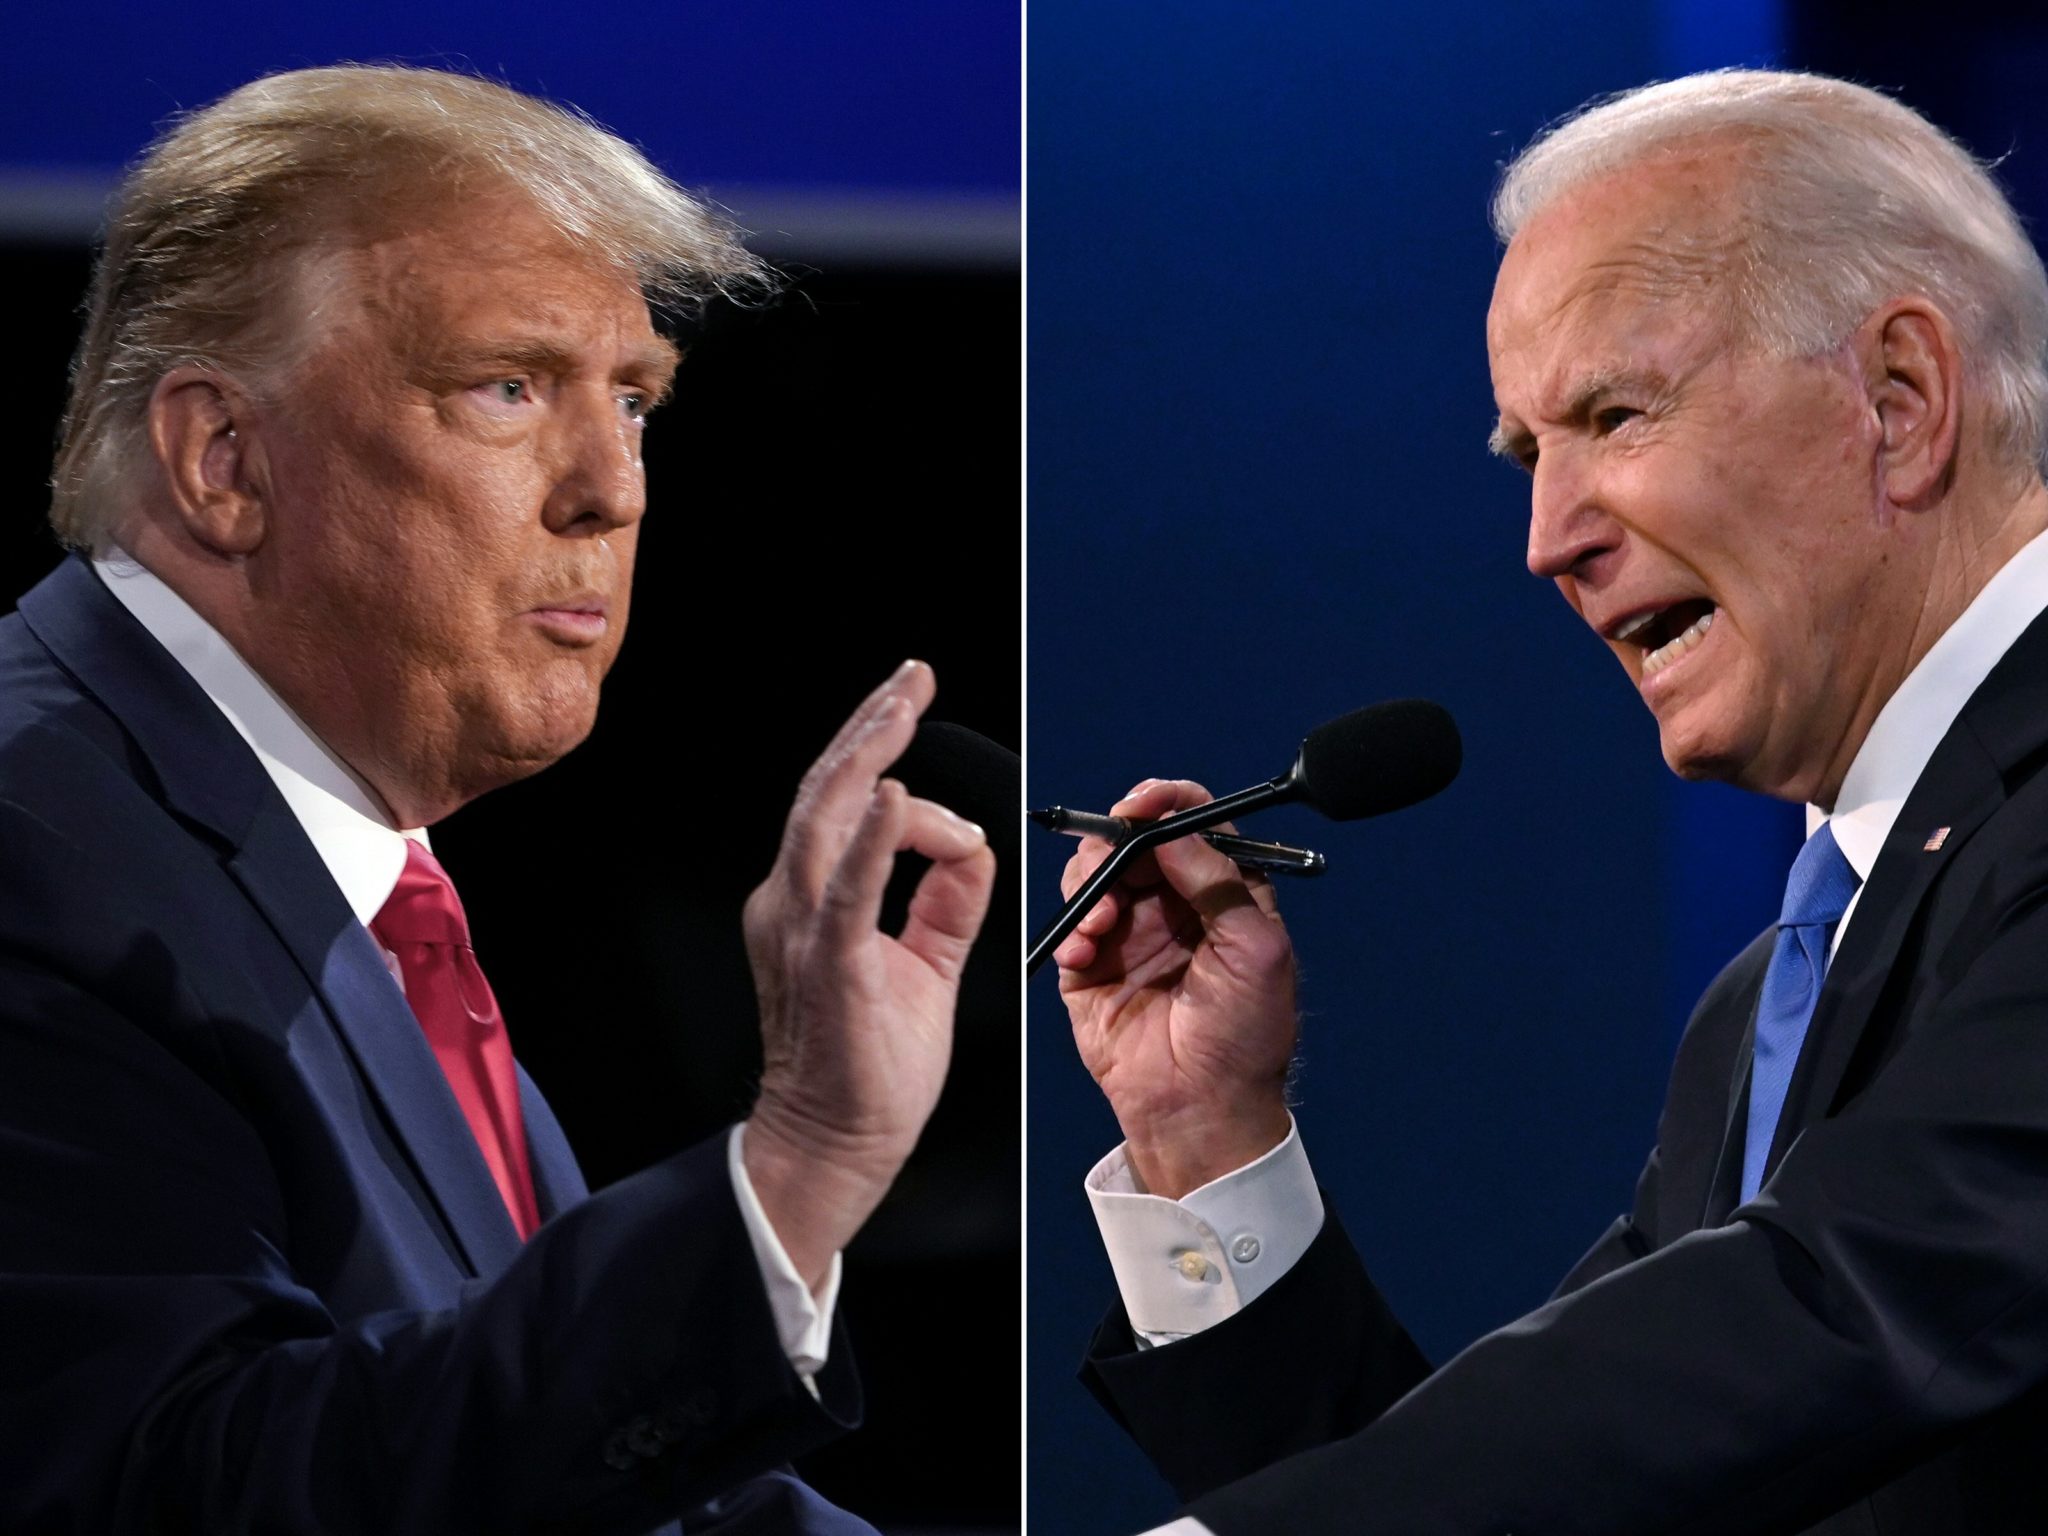 Election candidates US President Donald Trump and former US Vice President Joe Biden